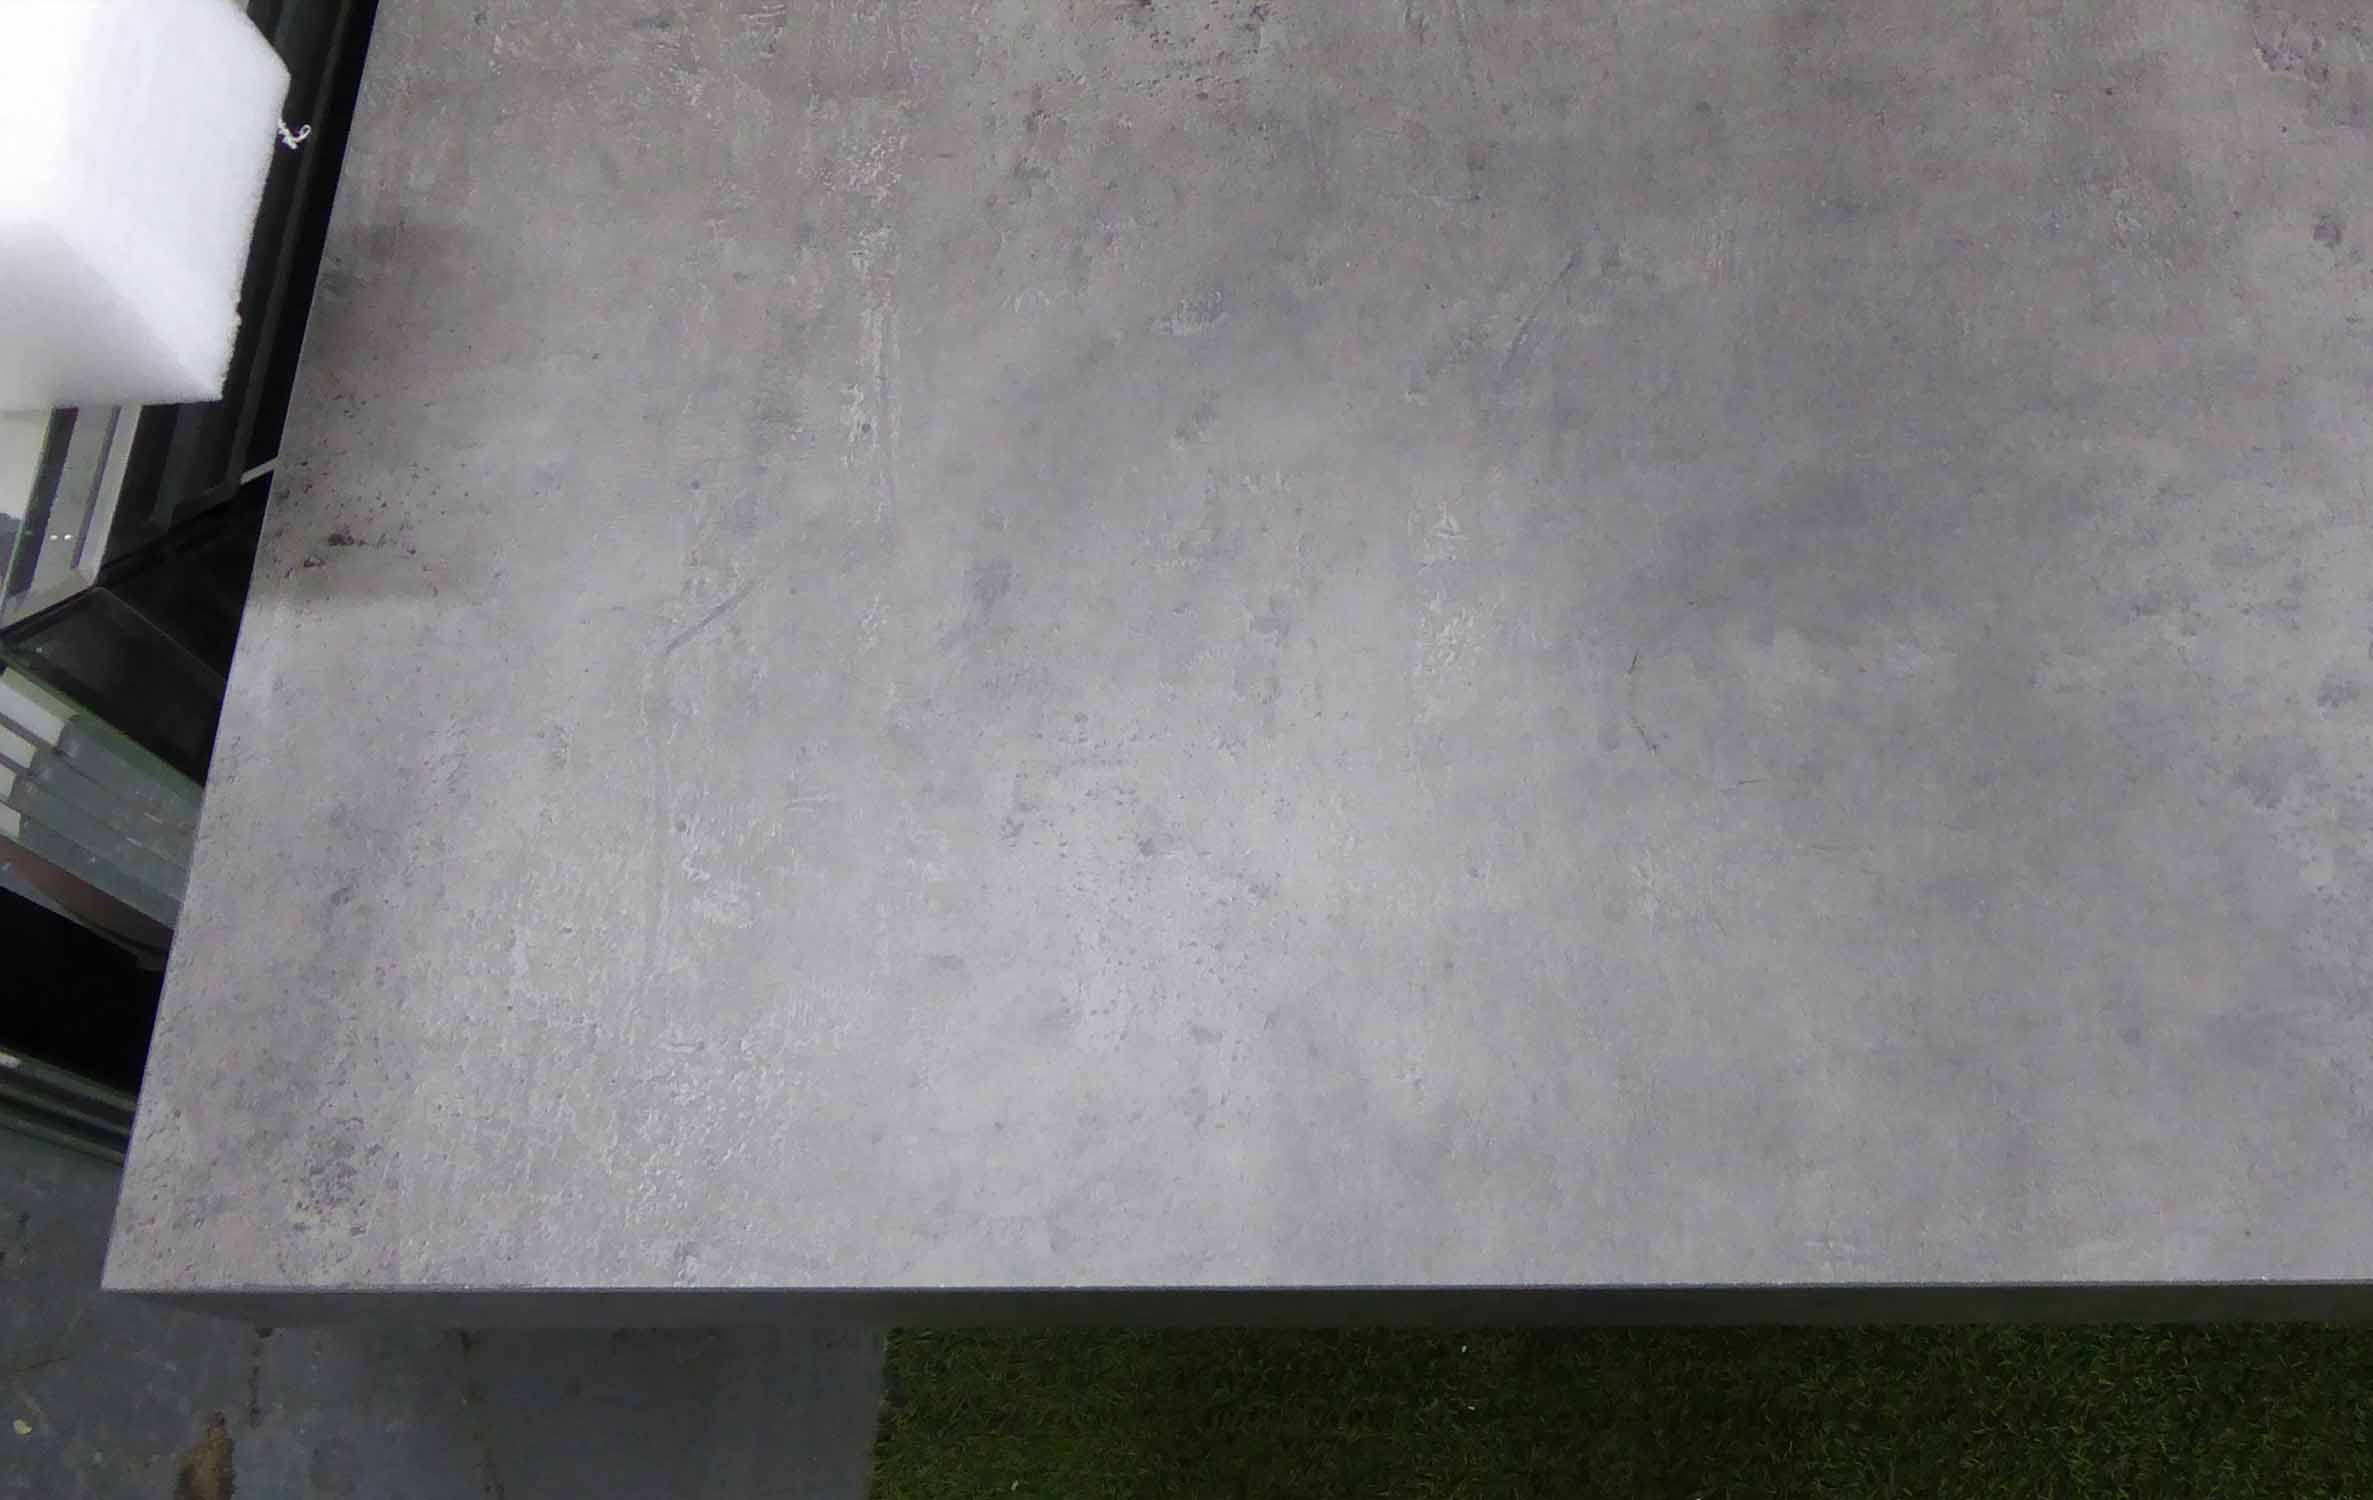 DINING TABLE, industrial style with a cement effect top on a plinth base, 150cm x 150cm x 75cm H. - Image 3 of 3